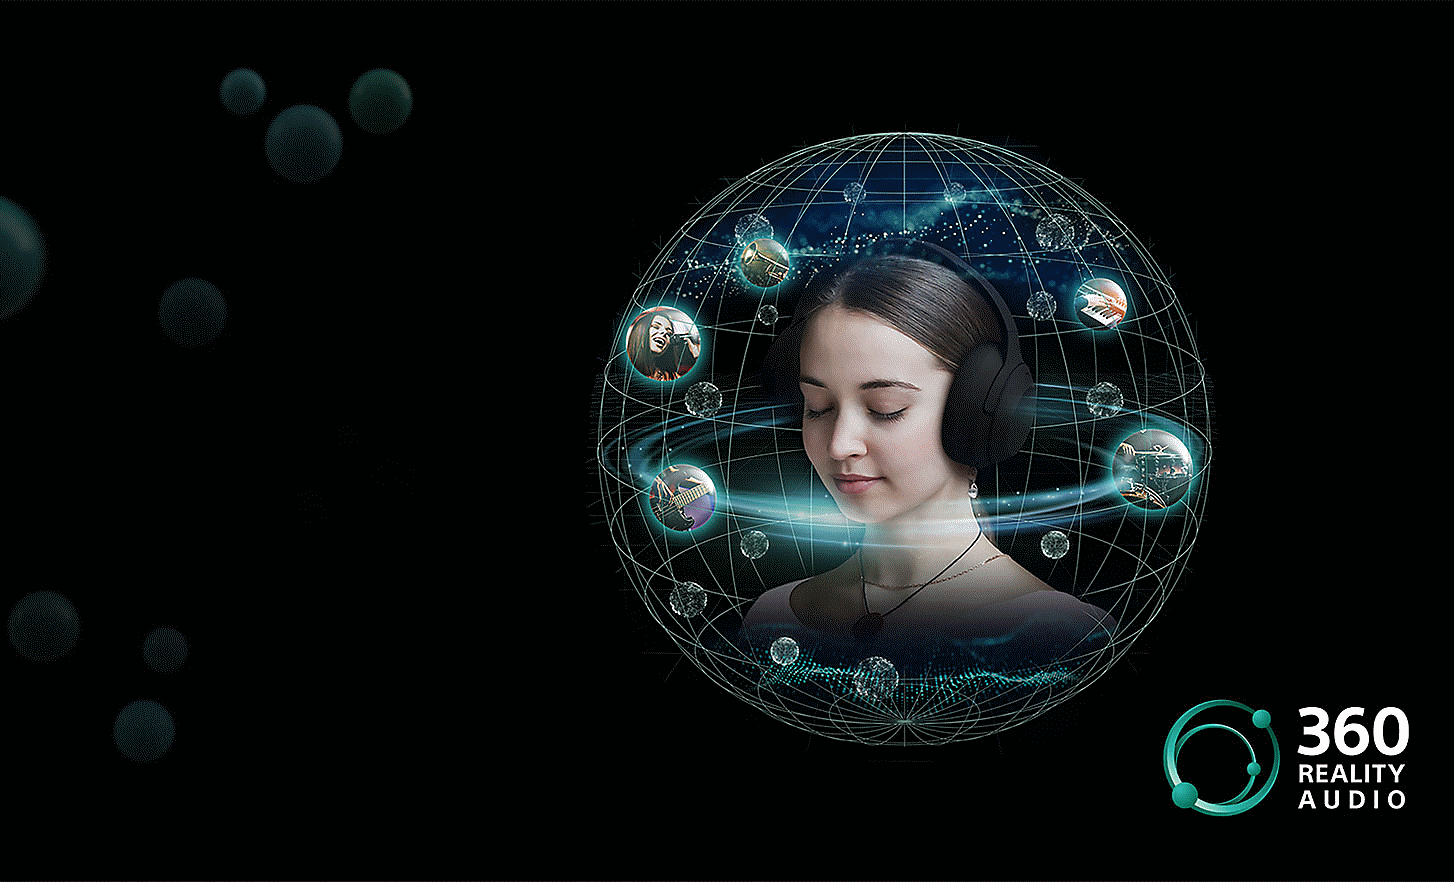 Image of a woman wearing headphones in a globe-shaped net with various images circling her head